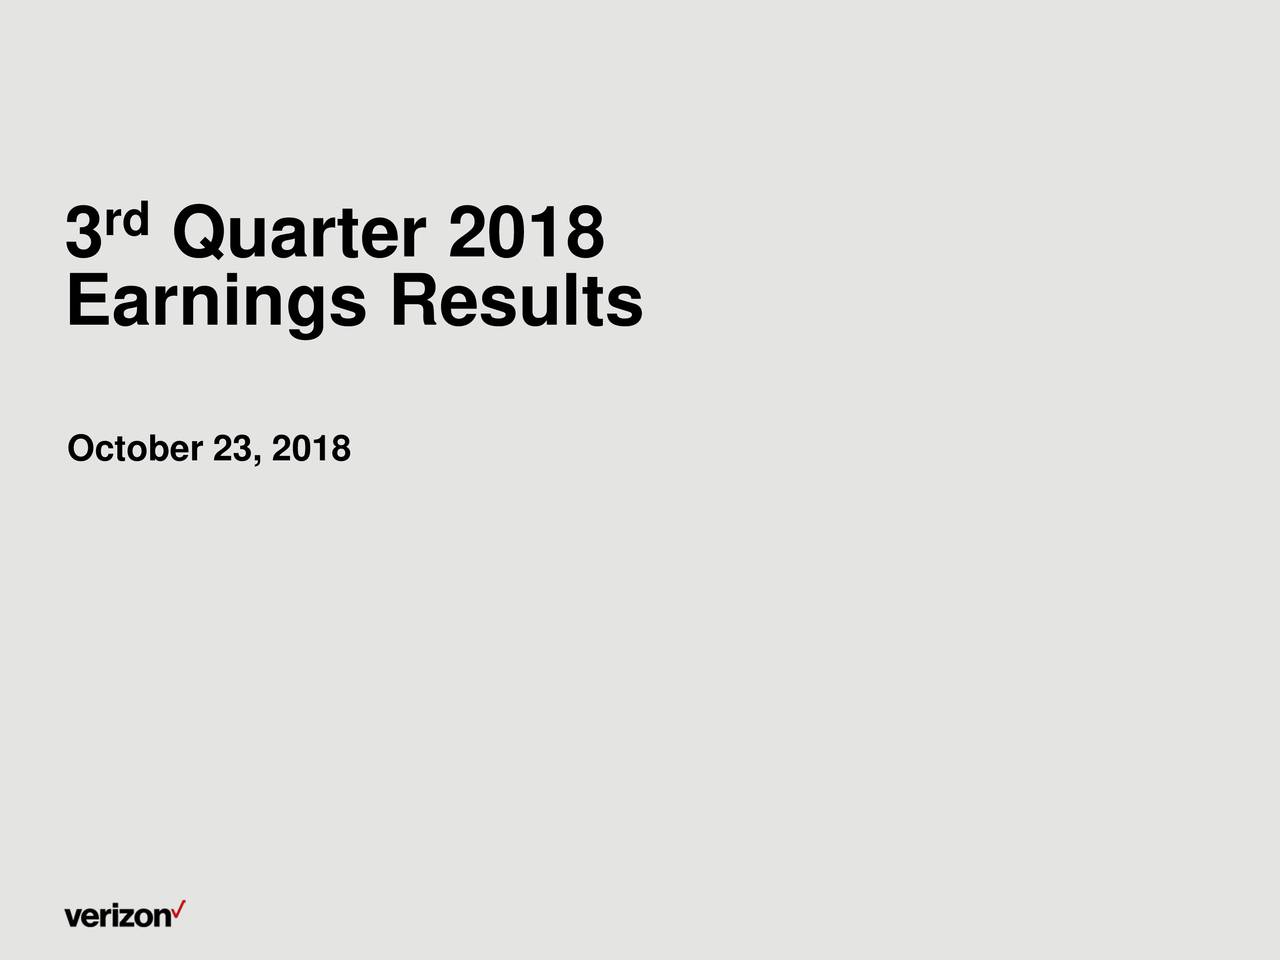 Verizon Communications 2018 Q3 Results Earnings Call Slides (NYSE